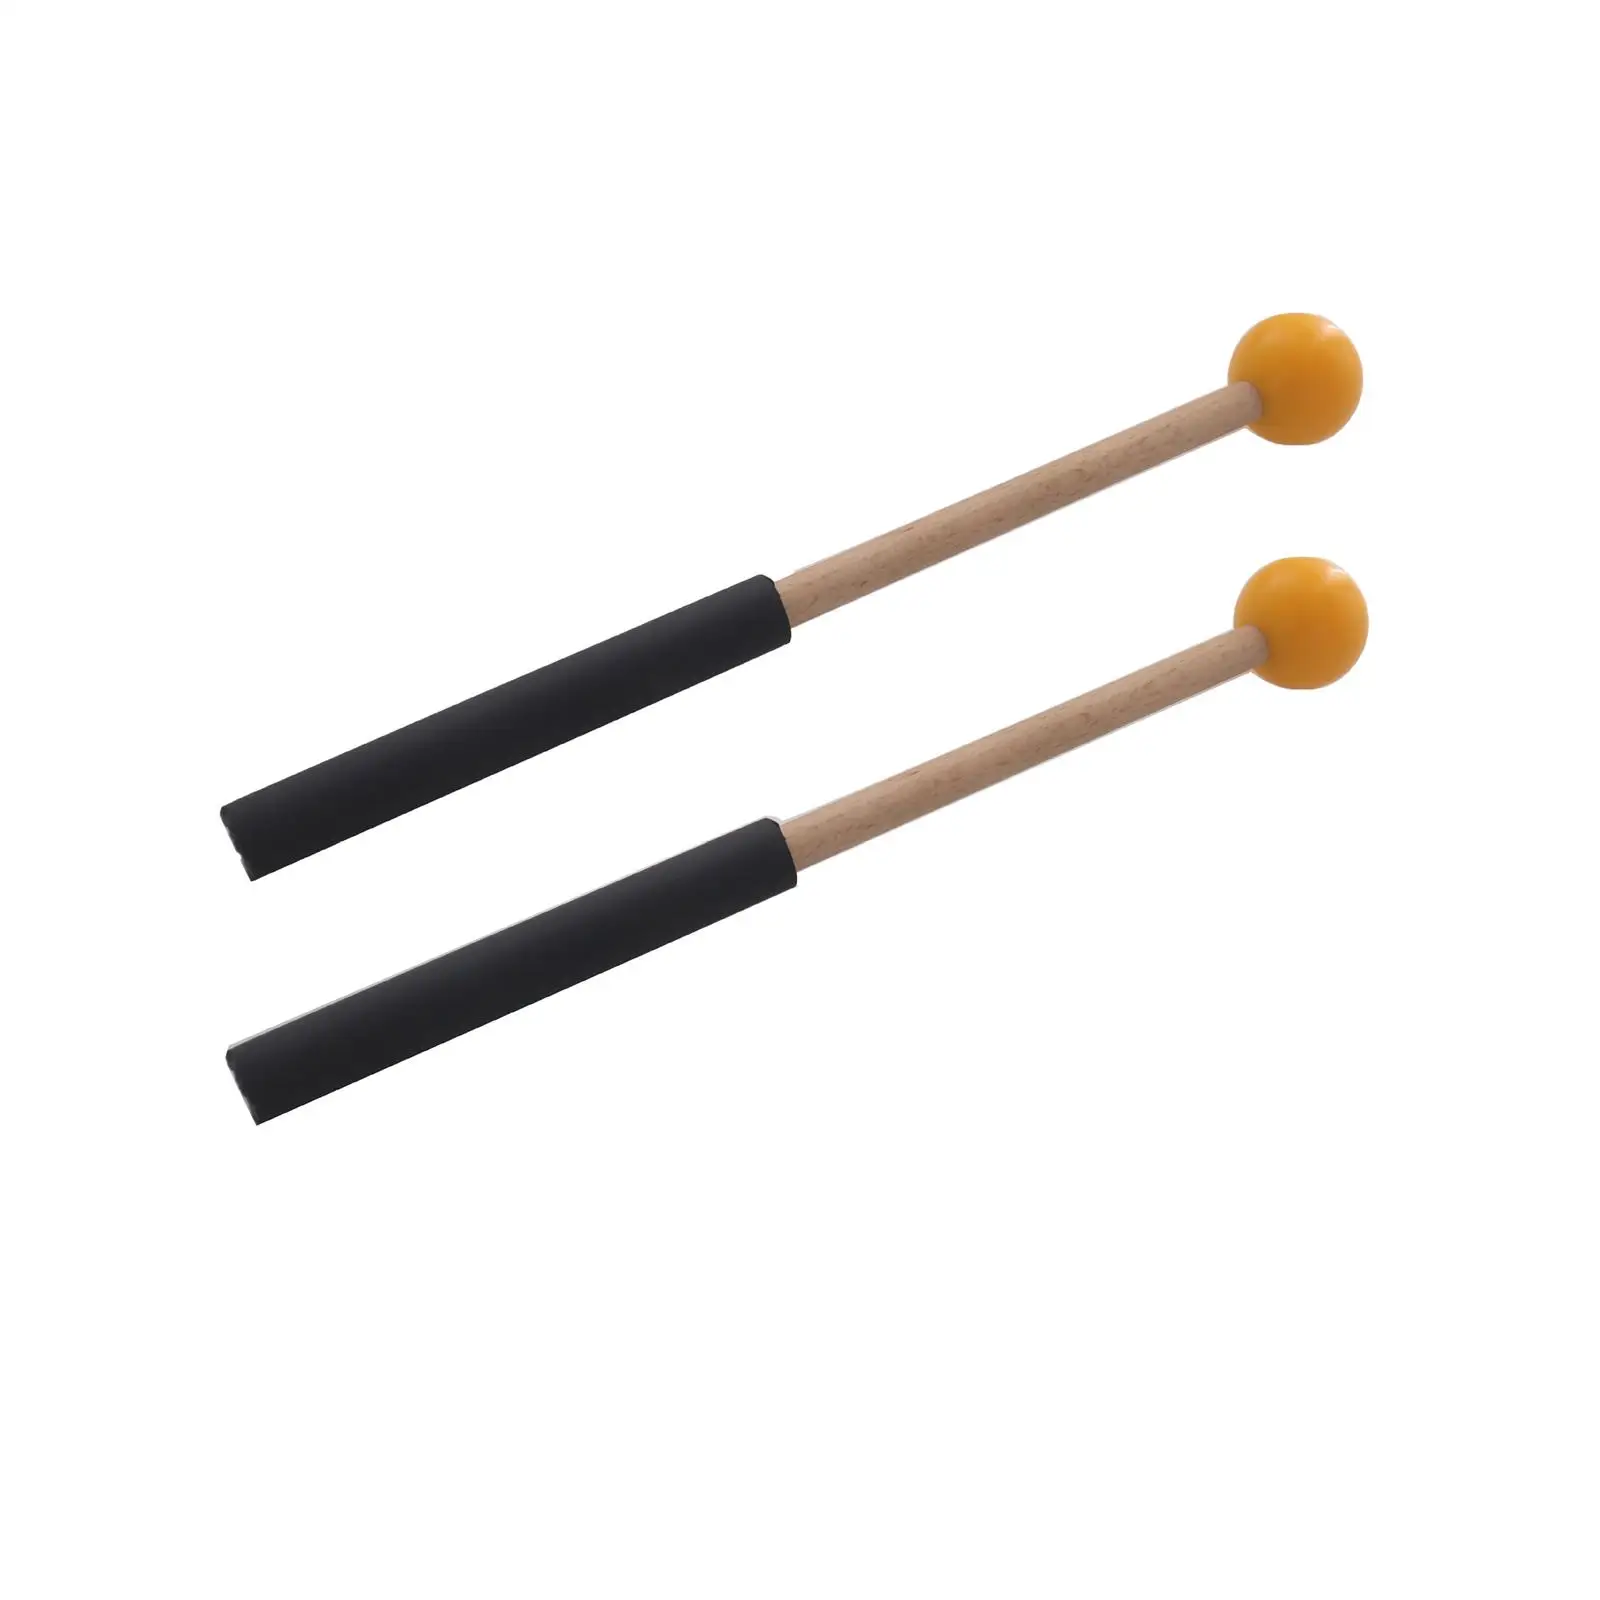 2 Pieces Rubber Mallet Percussion Musical Drumstick Music Instrument Accessory Percussion Drumsticks for Carillon Xylophone Yoga